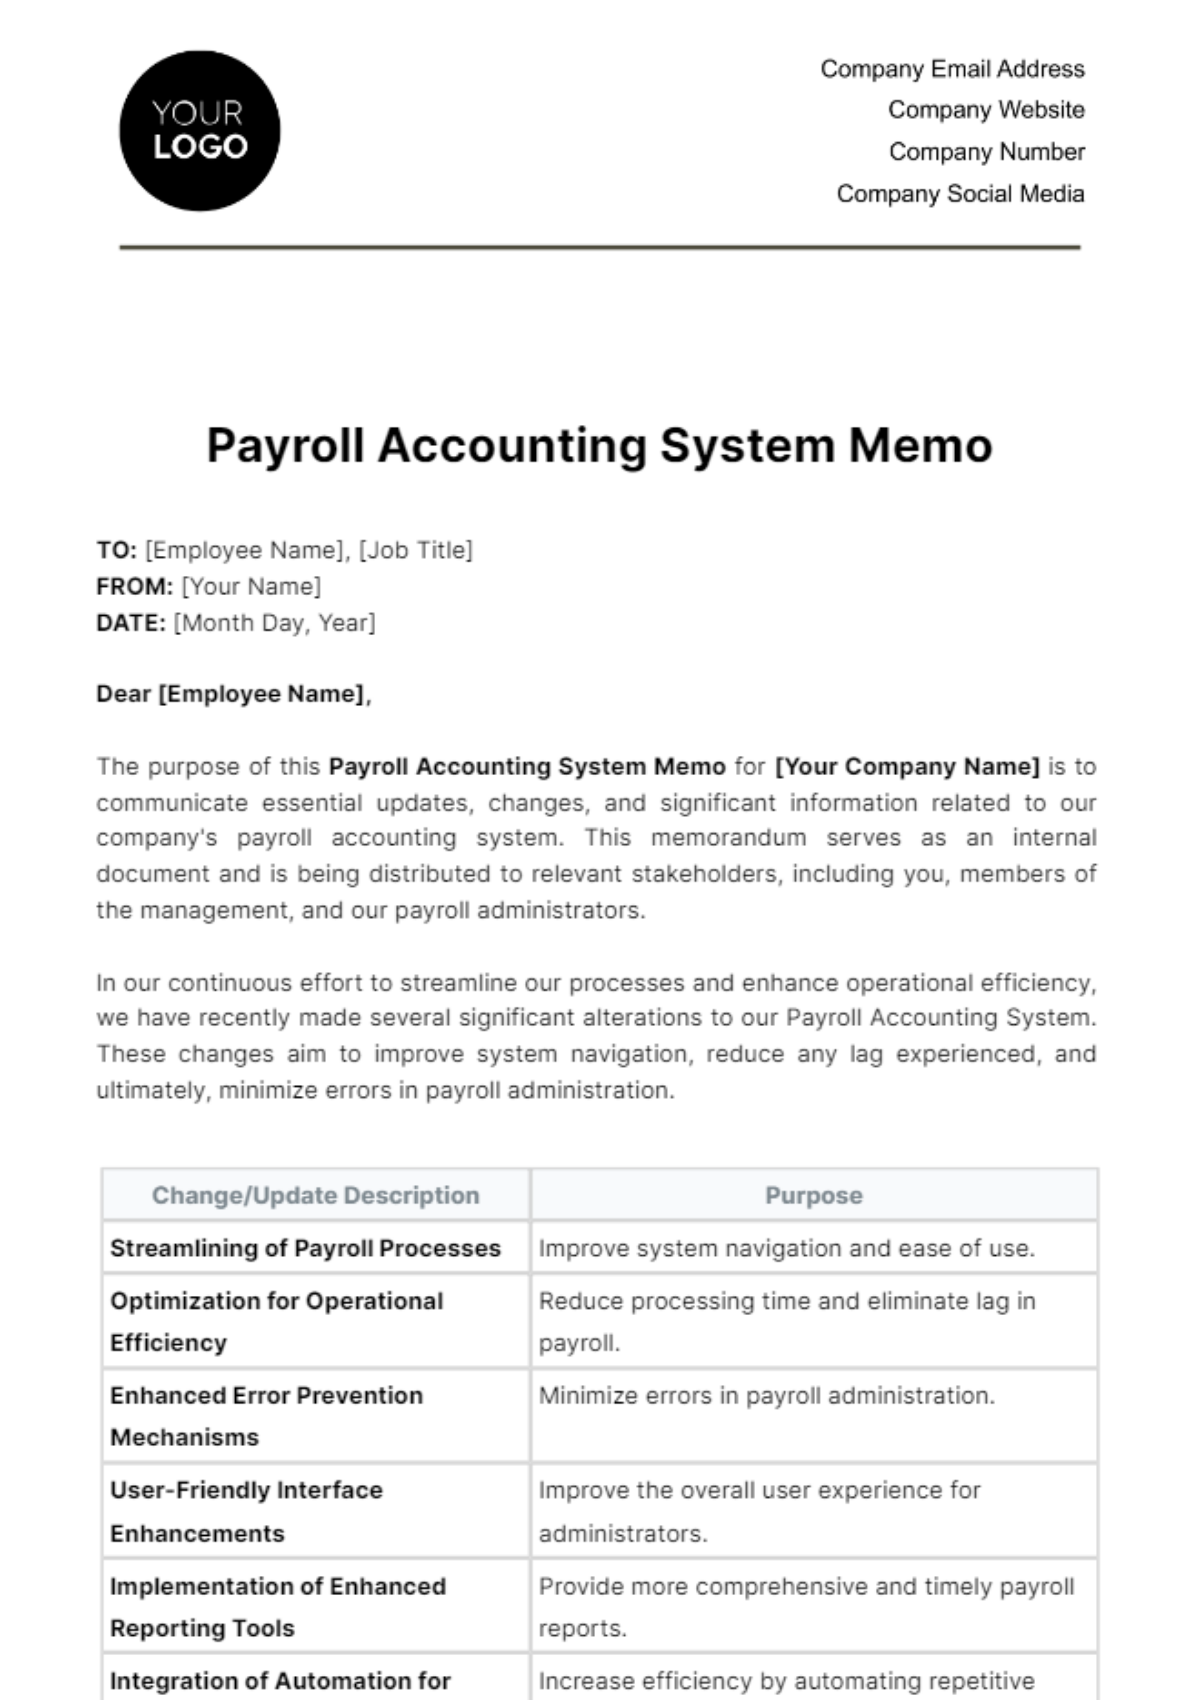 Free Payroll Accounting System Memo Template